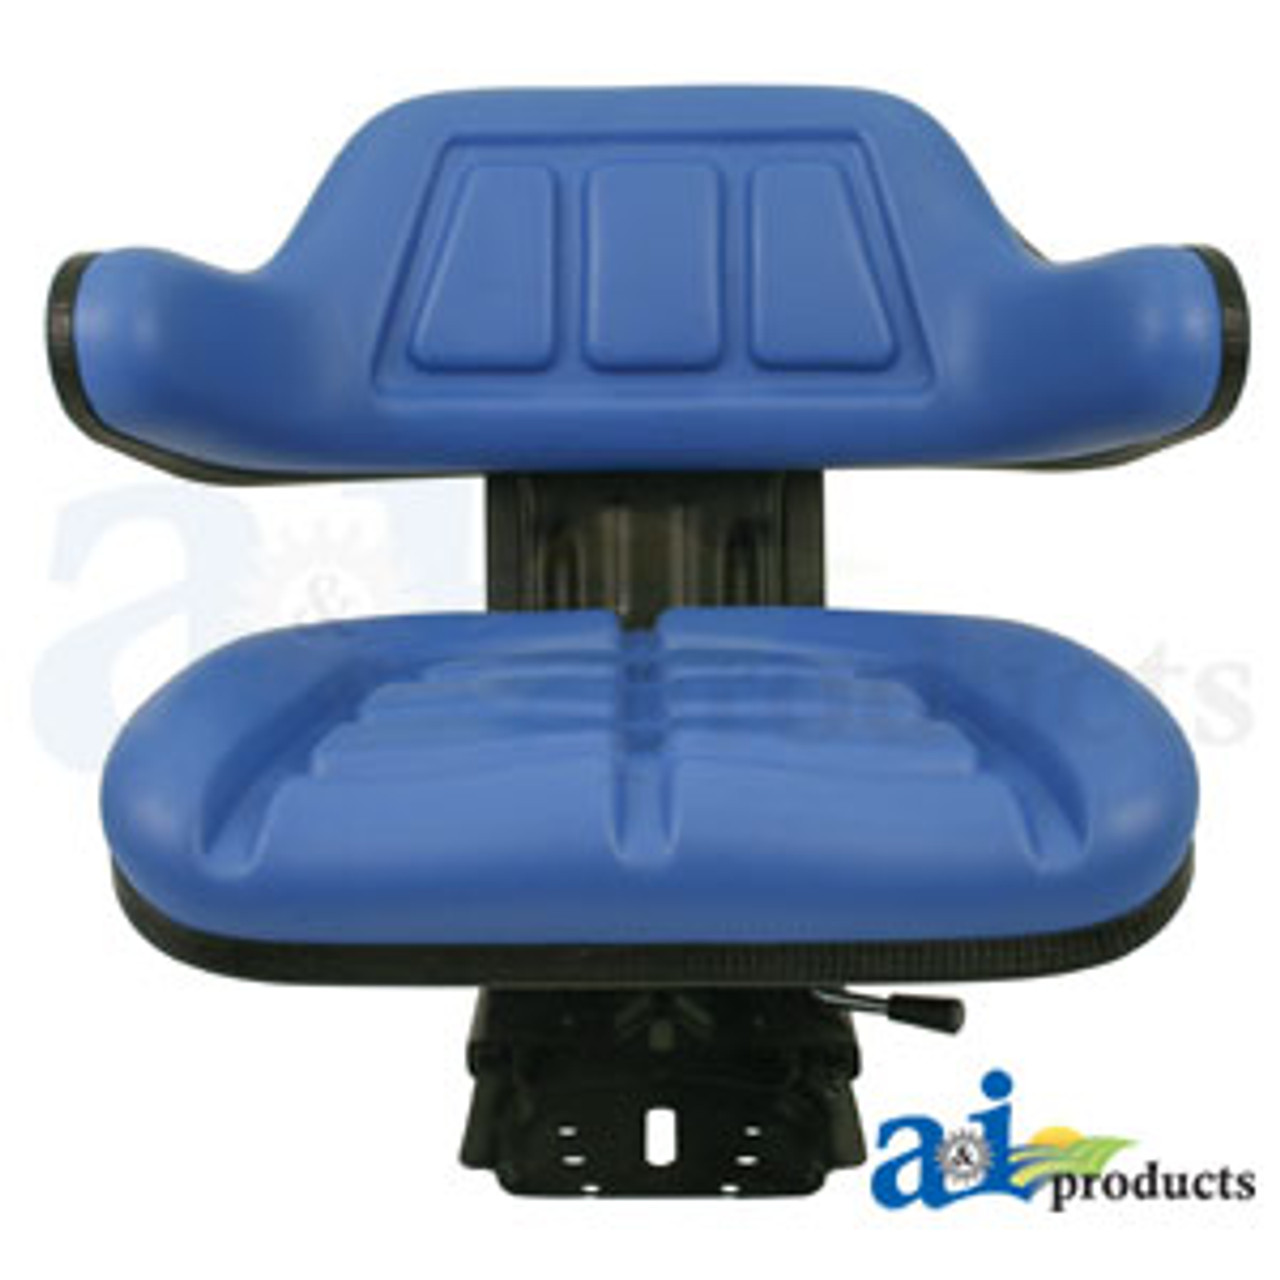 2 Pack Blue Universal Tractor Seats Fits Ford/Newholland Tractors